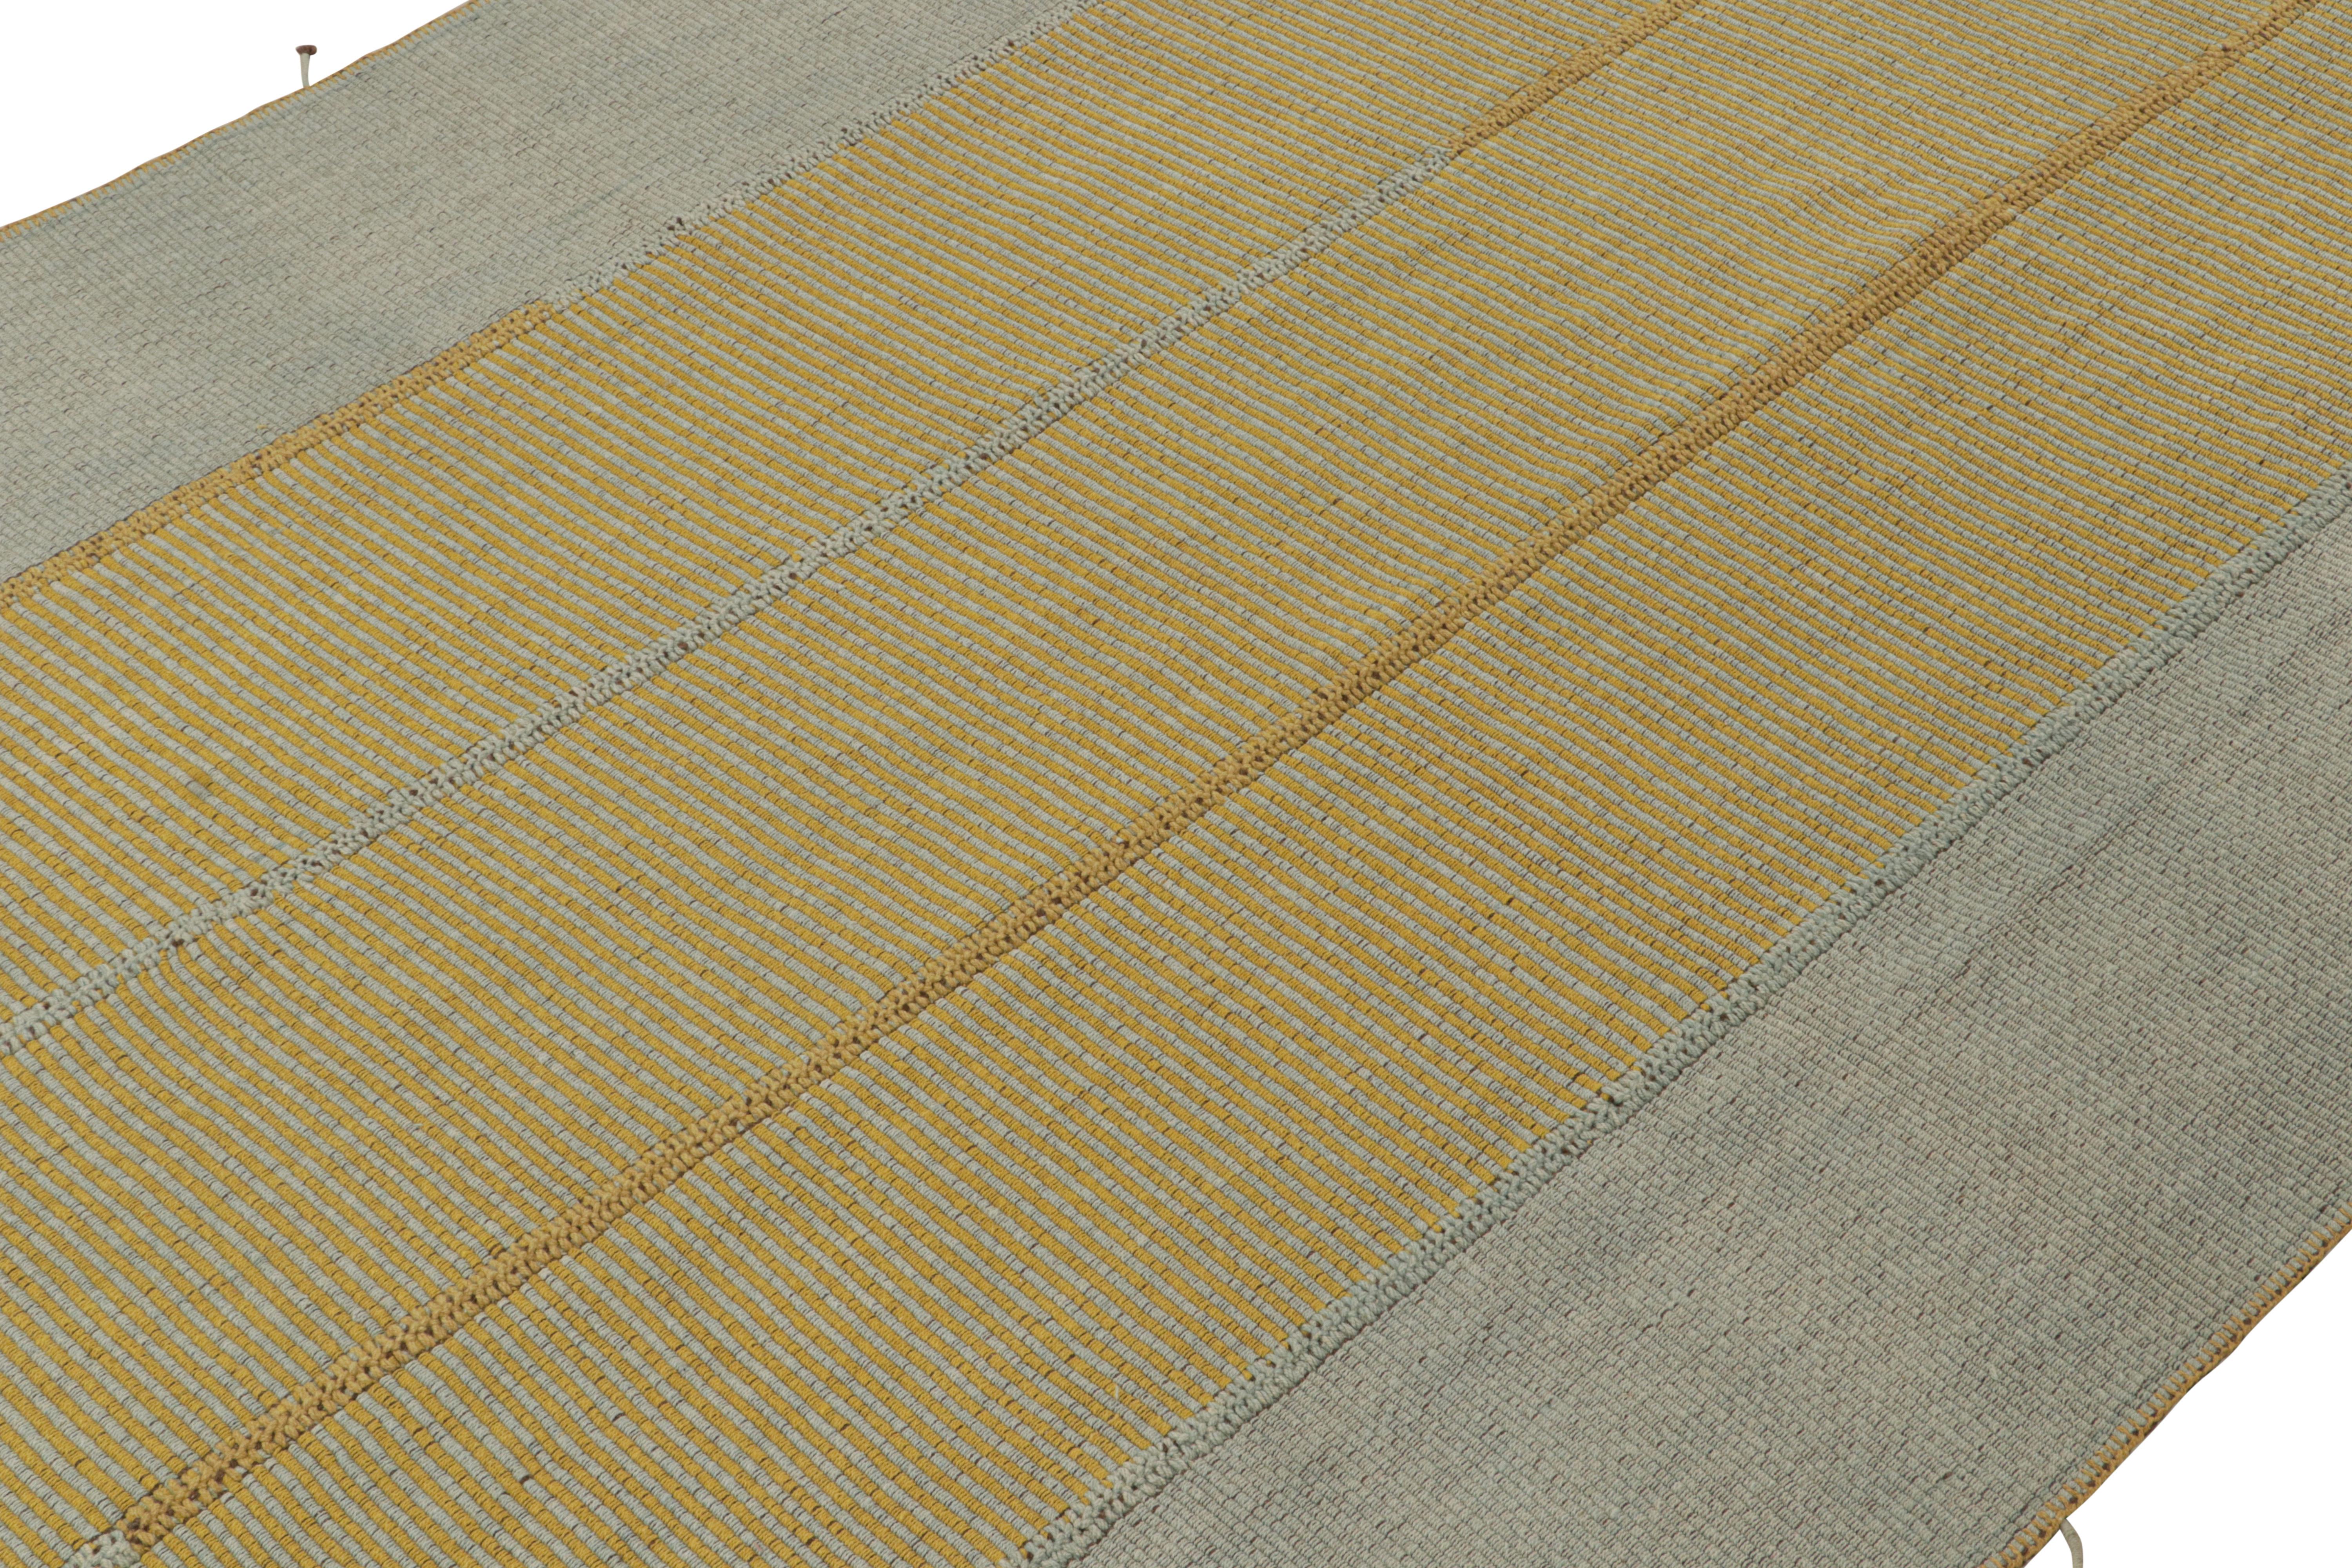 Handwoven in wool, a 9x12 Kilim from a bold new line of contemporary flatweaves by Rug & Kilim.

On the Design: 
Connoting a modern take on Classic panel-weaving, our latest “Rez Kilim” enjoys blue and gold with rich brown accents. Keen eyes will